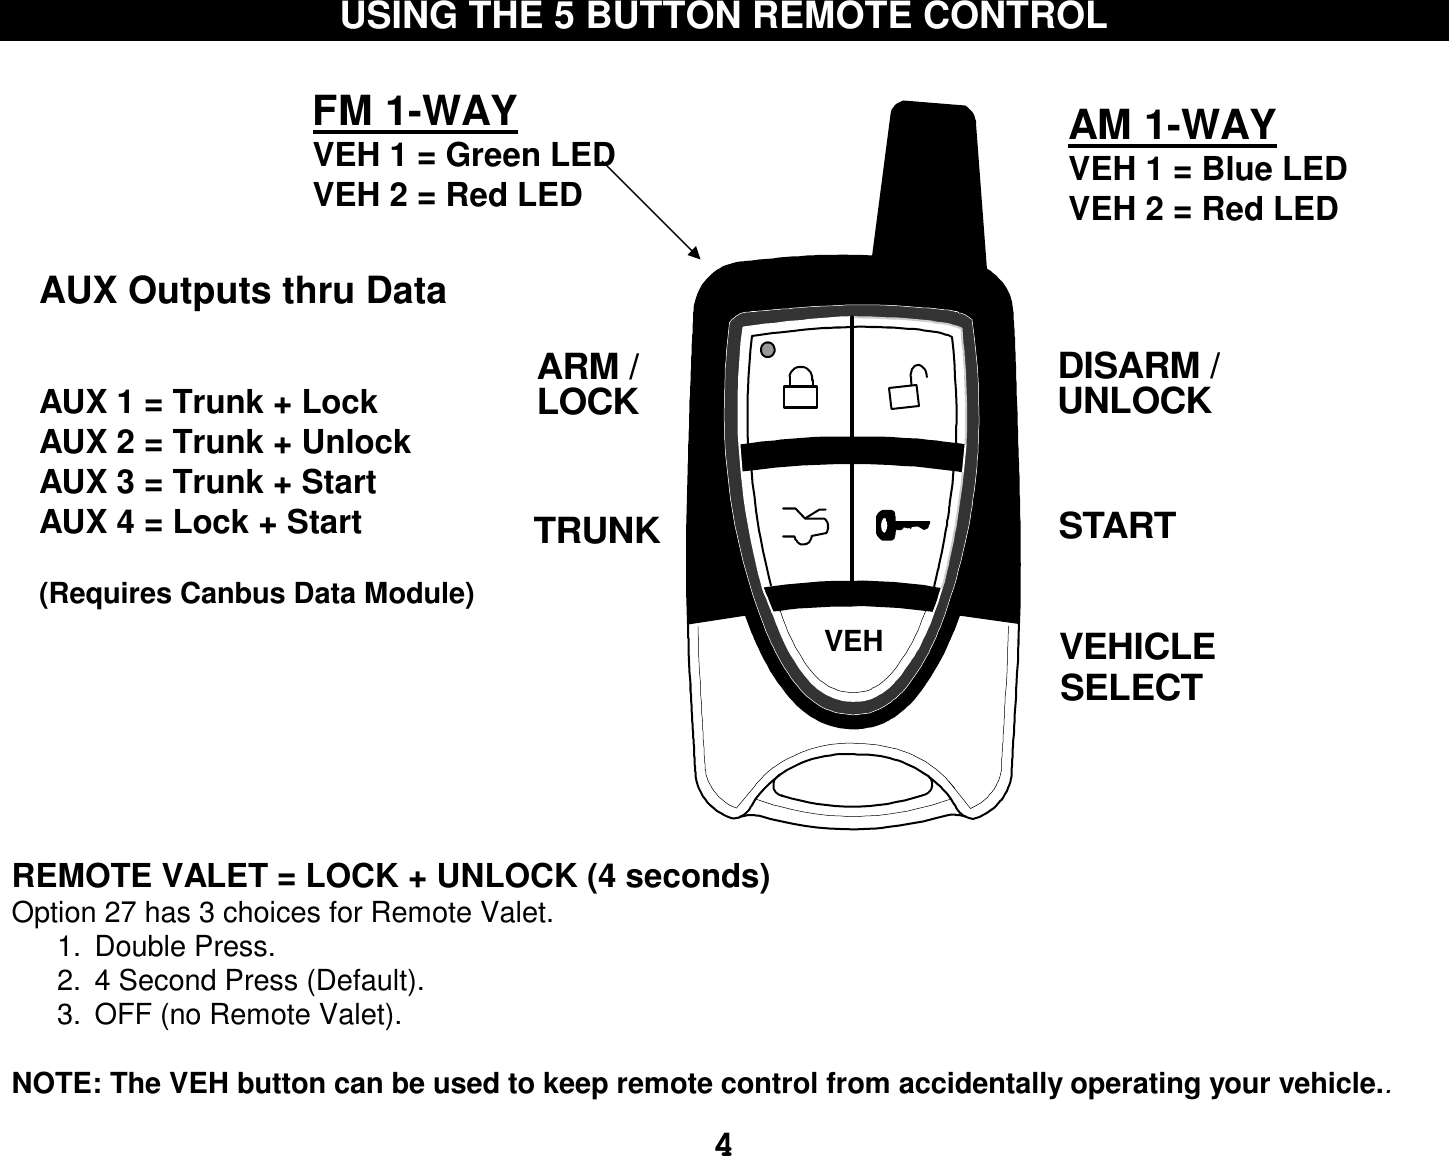  4 USING THE 5 BUTTON REMOTE CONTROL                            VEHUNLOCKSTARTDISARM /ARM /LOCKTRUNKVEHICLESELECT  REMOTE VALET = LOCK + UNLOCK (4 seconds) Option 27 has 3 choices for Remote Valet. 1. Double Press. 2. 4 Second Press (Default). 3. OFF (no Remote Valet).  NOTE: The VEH button can be used to keep remote control from accidentally operating your vehicle.. FM 1-WAY VEH 1 = Green LED  VEH 2 = Red LED  AUX Outputs thru Data                 AUX 1 = Trunk + Lock AUX 2 = Trunk + Unlock AUX 3 = Trunk + Start AUX 4 = Lock + Start  (Requires Canbus Data Module) AM 1-WAY VEH 1 = Blue LED  VEH 2 = Red LED  